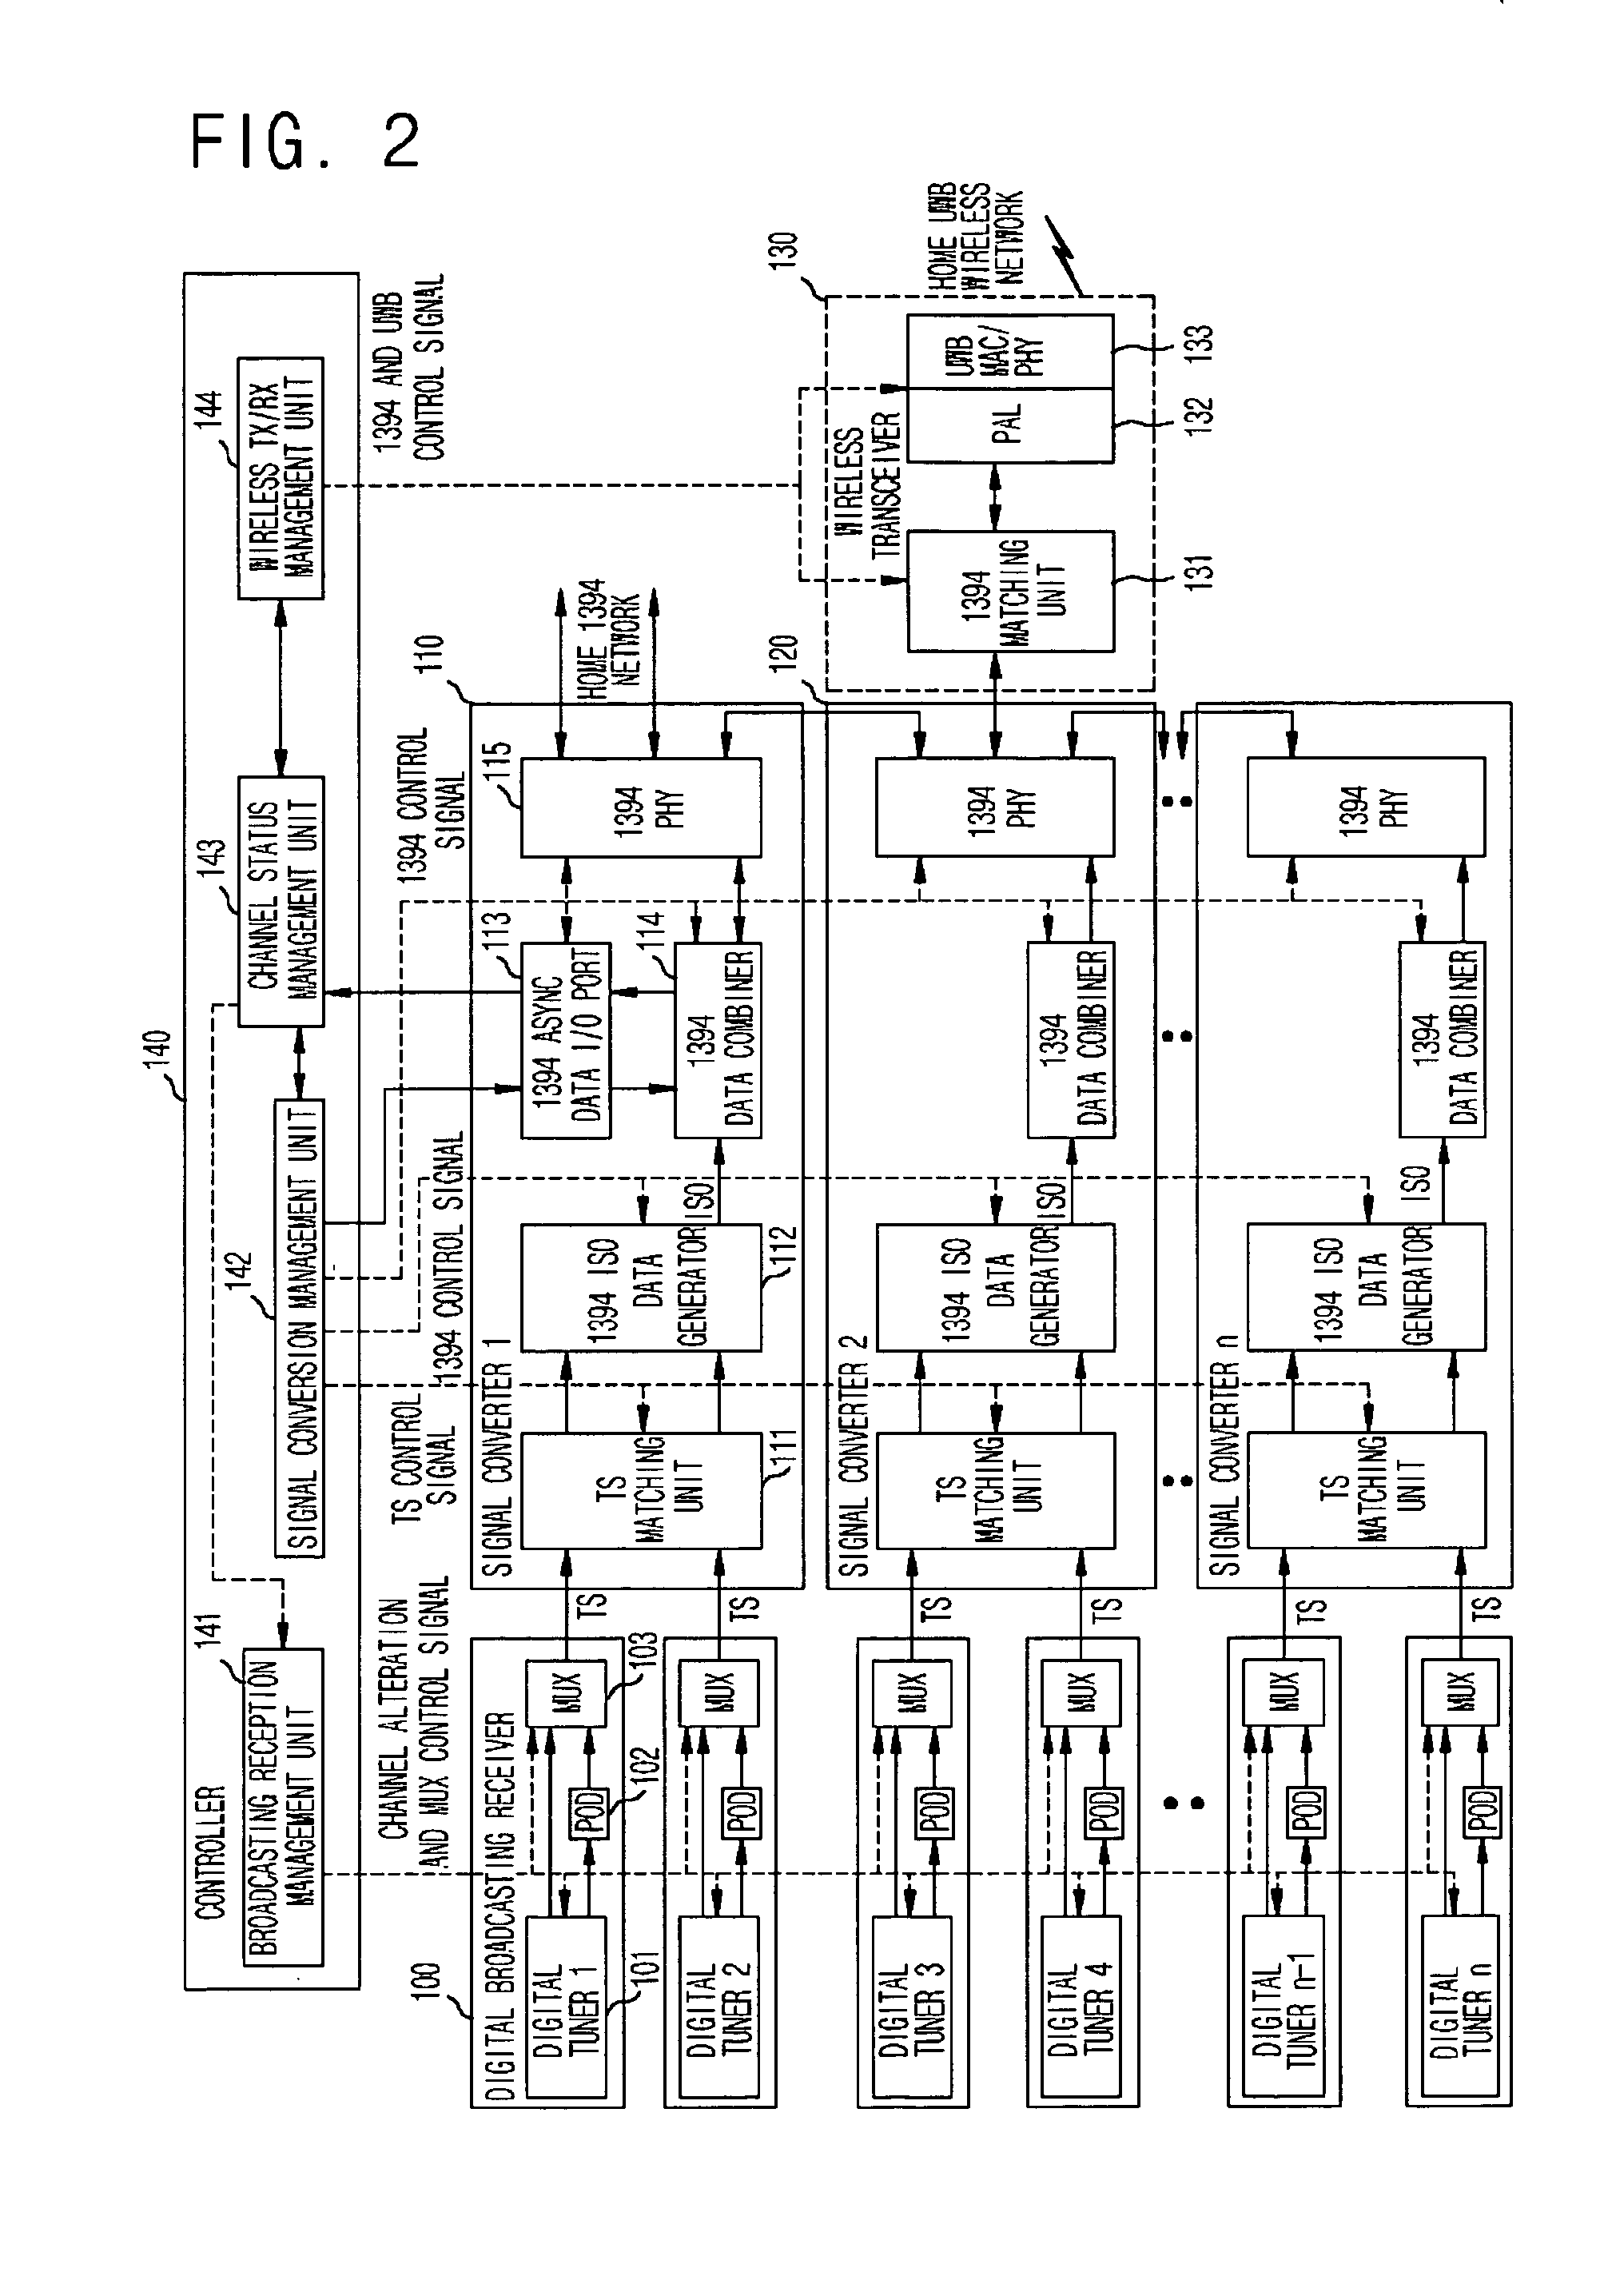 Wired/wireless broadcasting distribution apparatus having a home broadcasting distribution function and broadcasting channel formation/termination method using the same